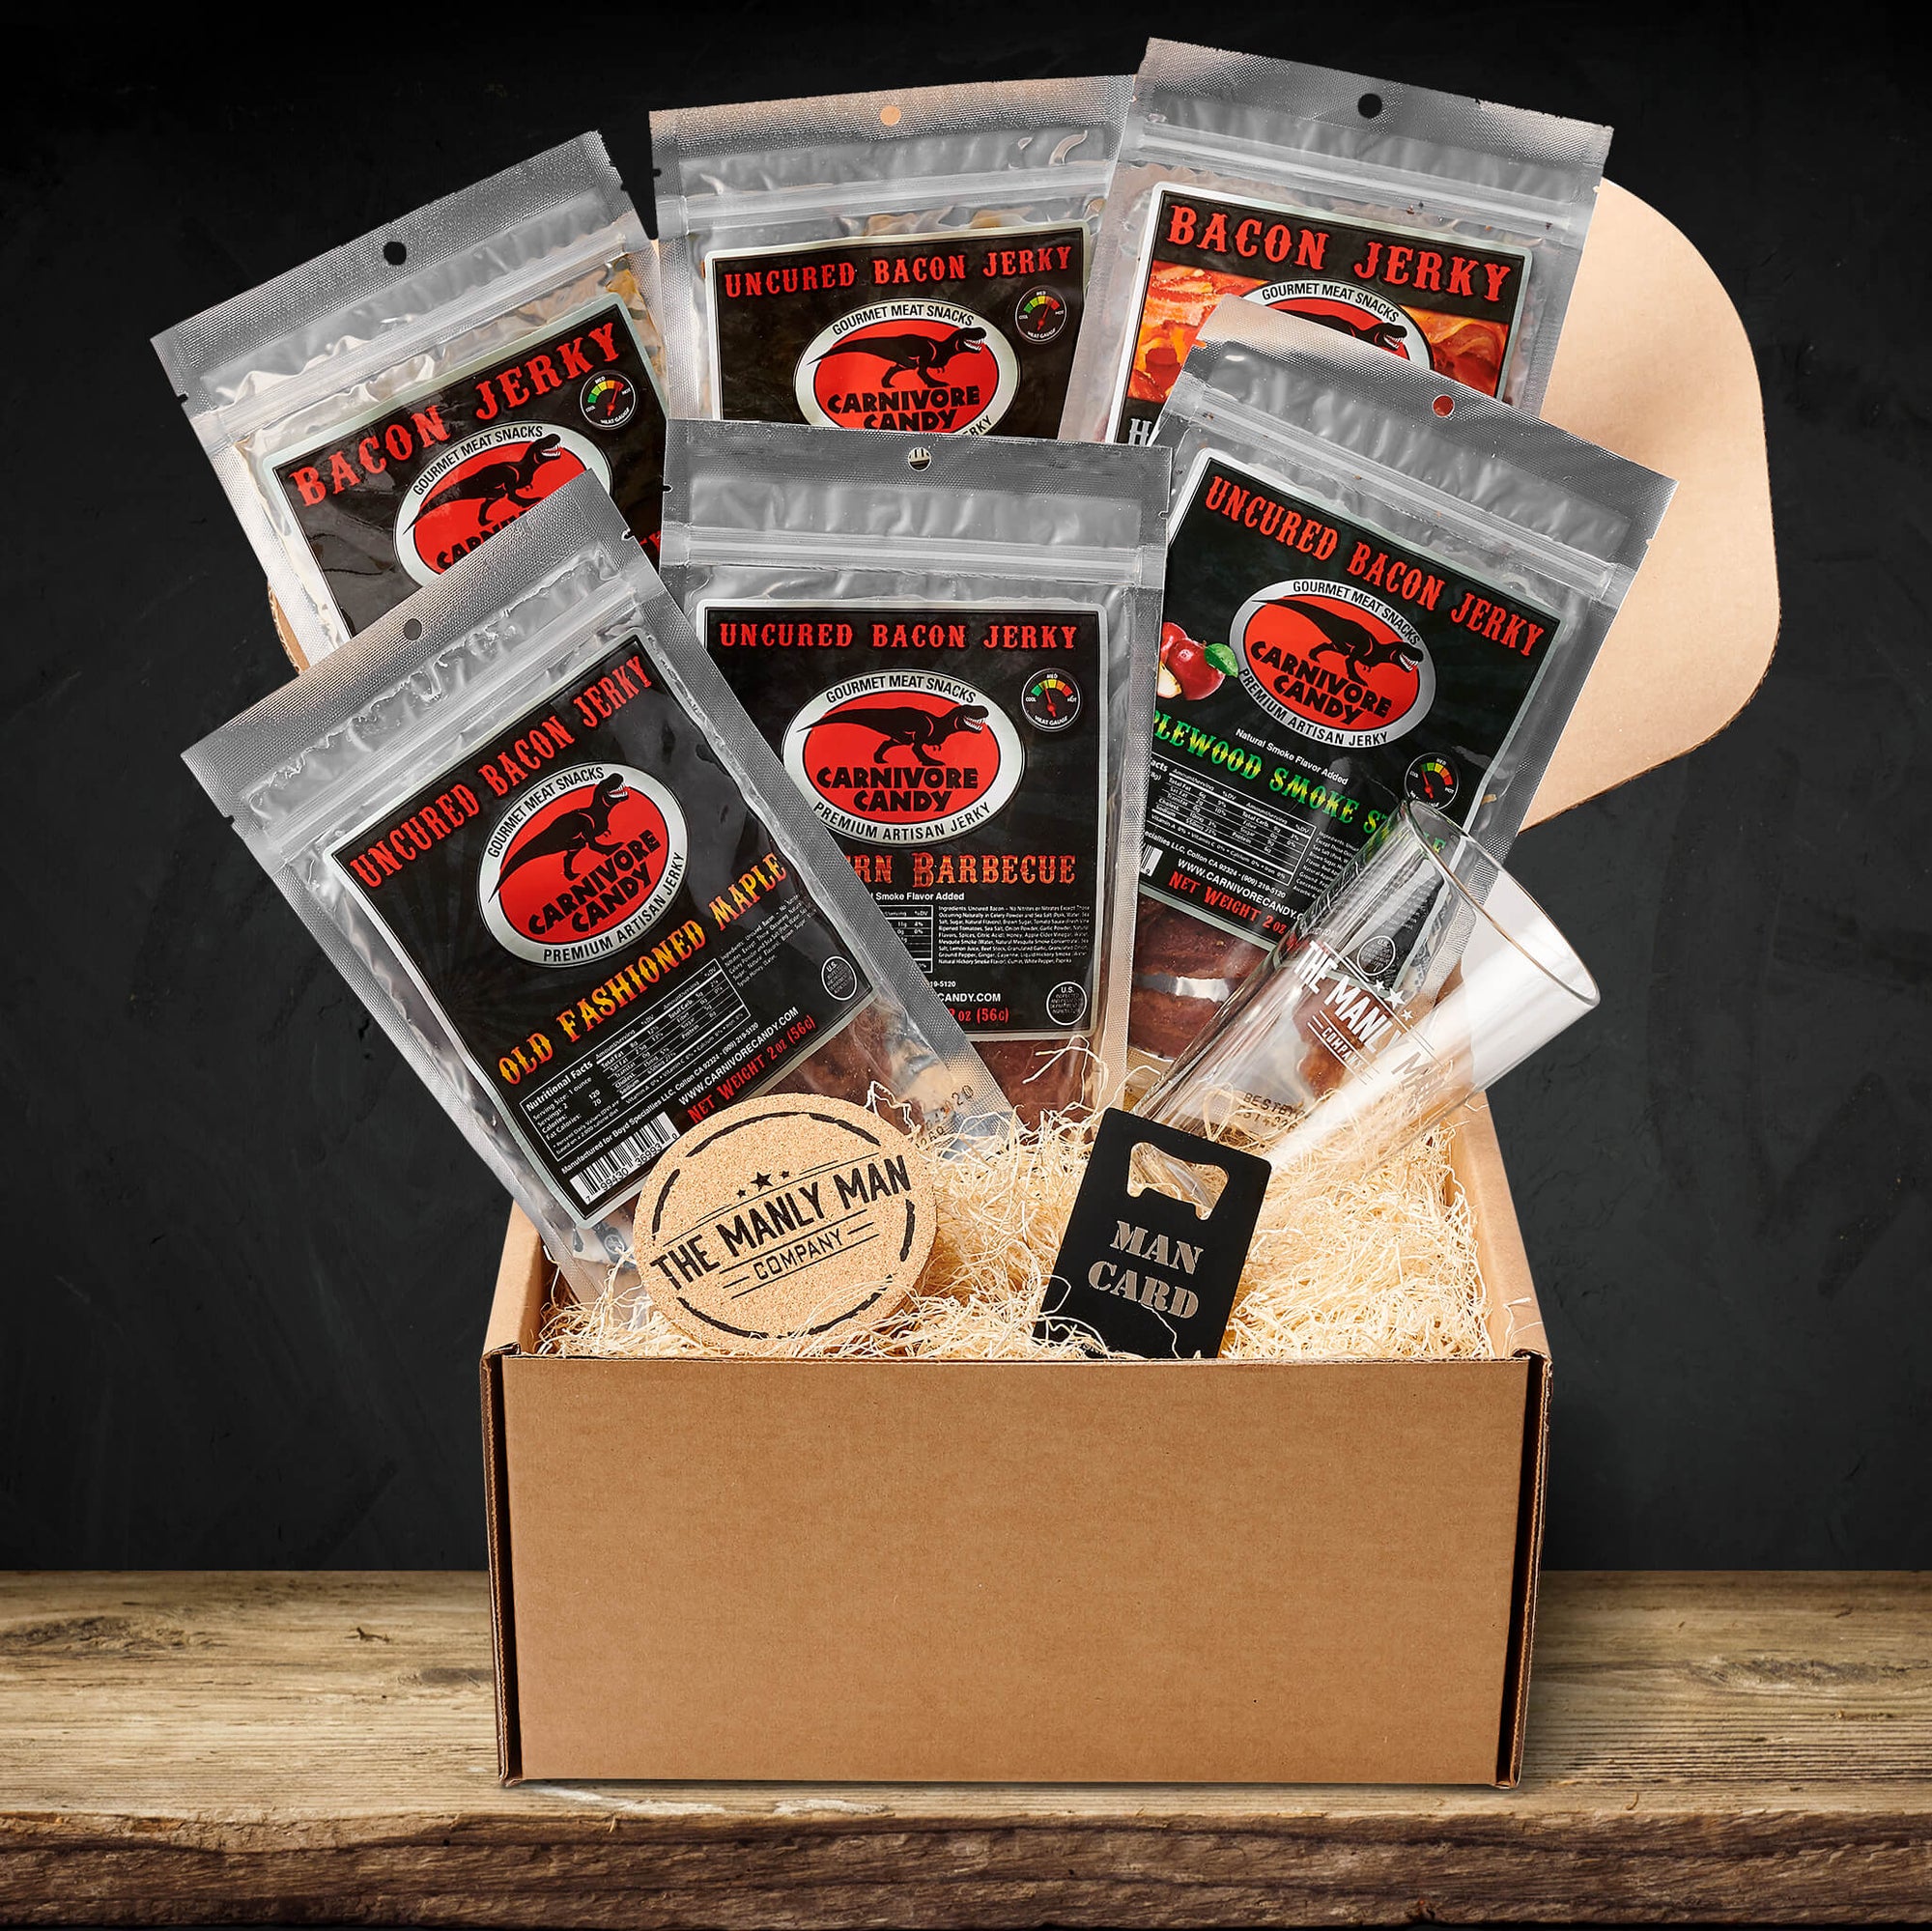 Gift box filled with bags of bacon jerky, a coaster, man card, and pint glass, on wood table